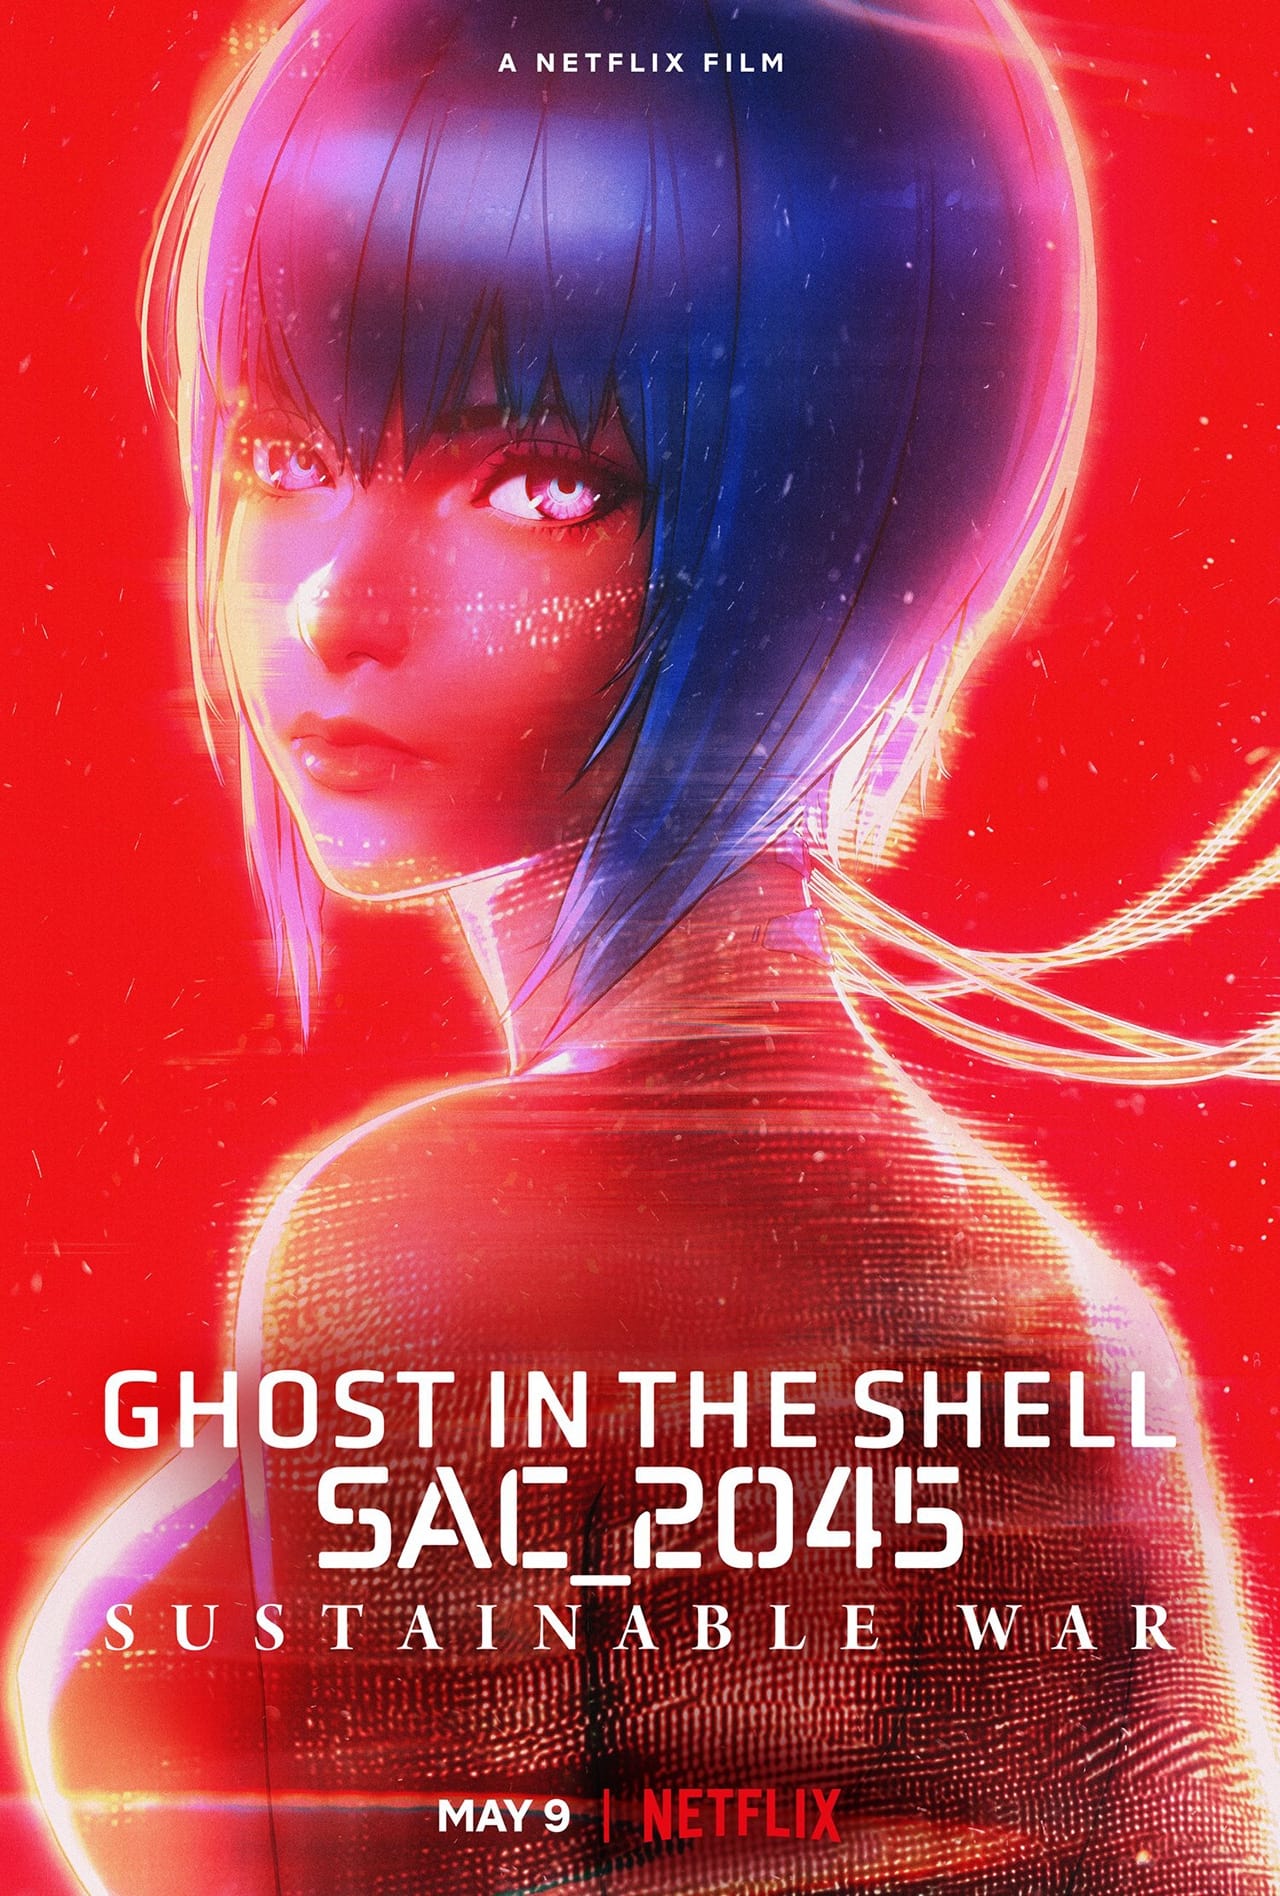 Ghost in the Shell: SAC 2045 - Guerra Sostenible